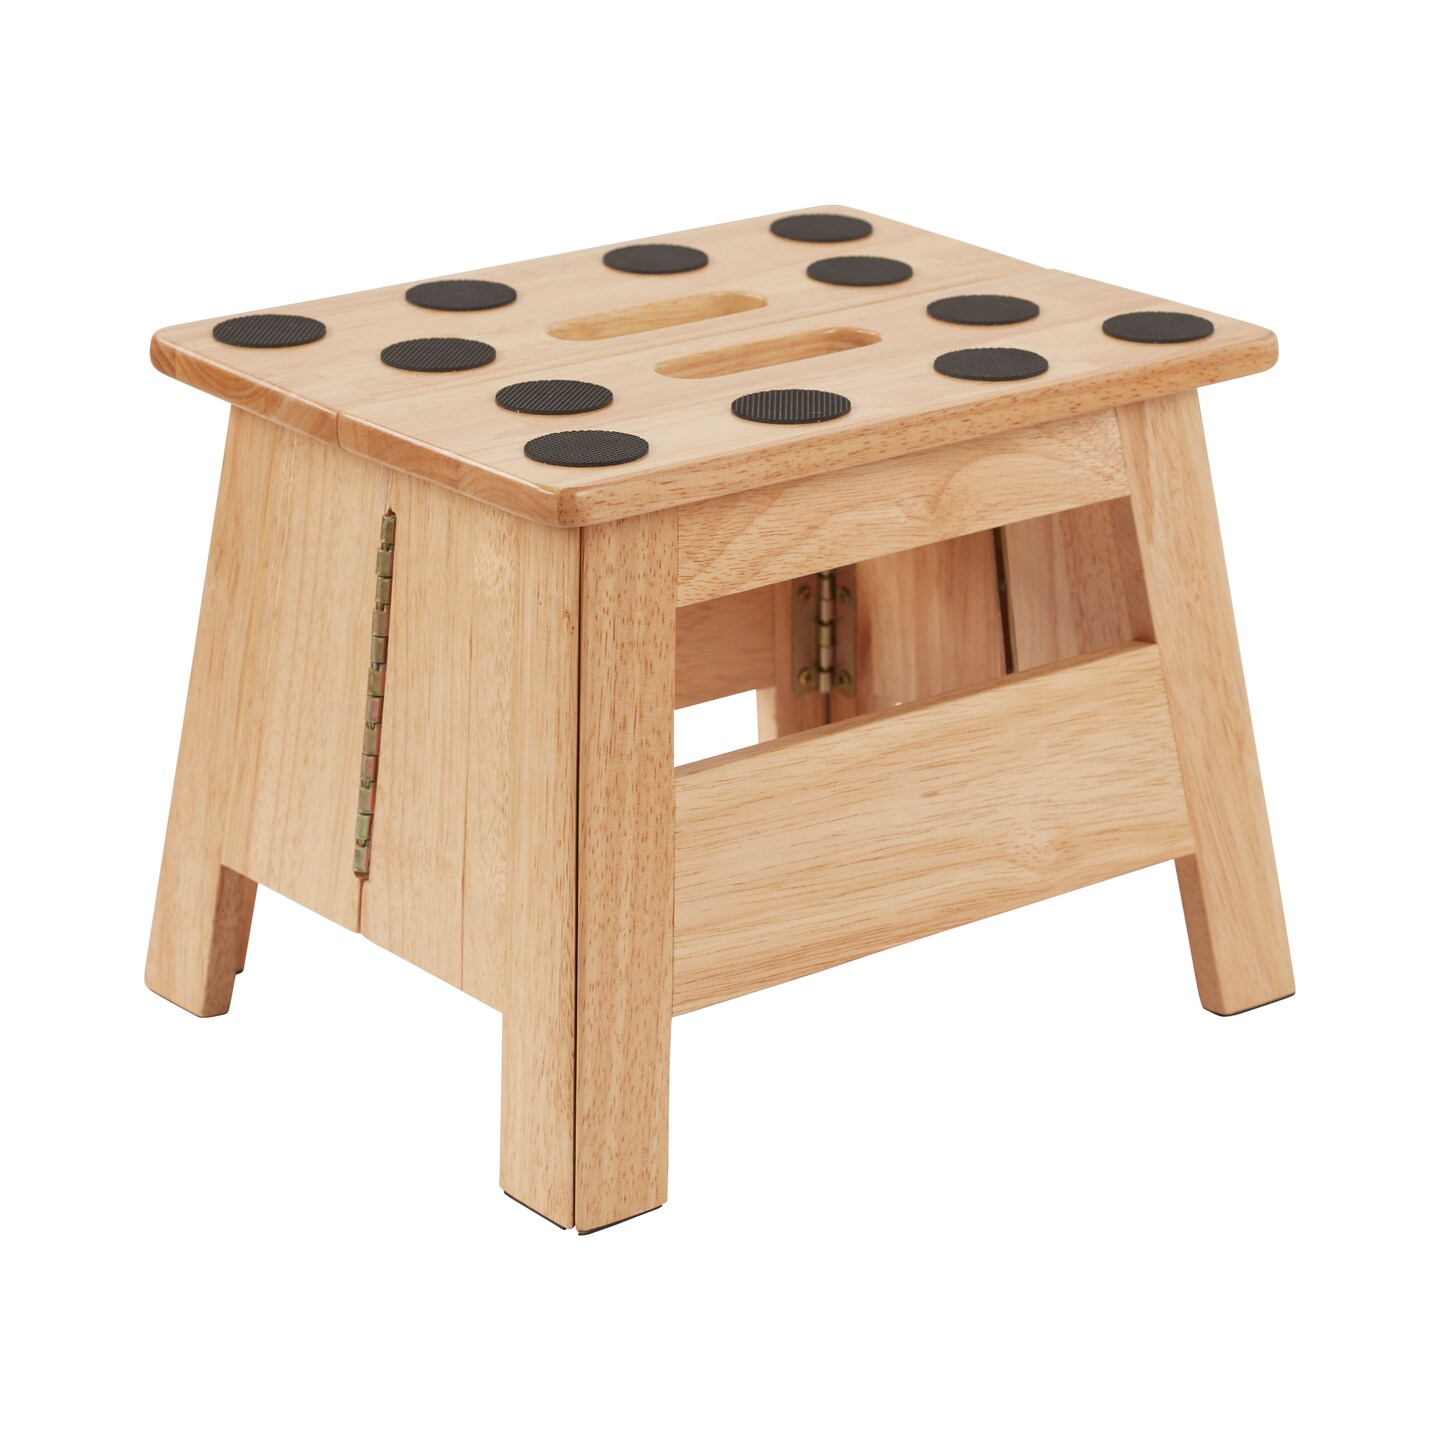 Folding Step Stool with Handle, Kids Furniture, Natural